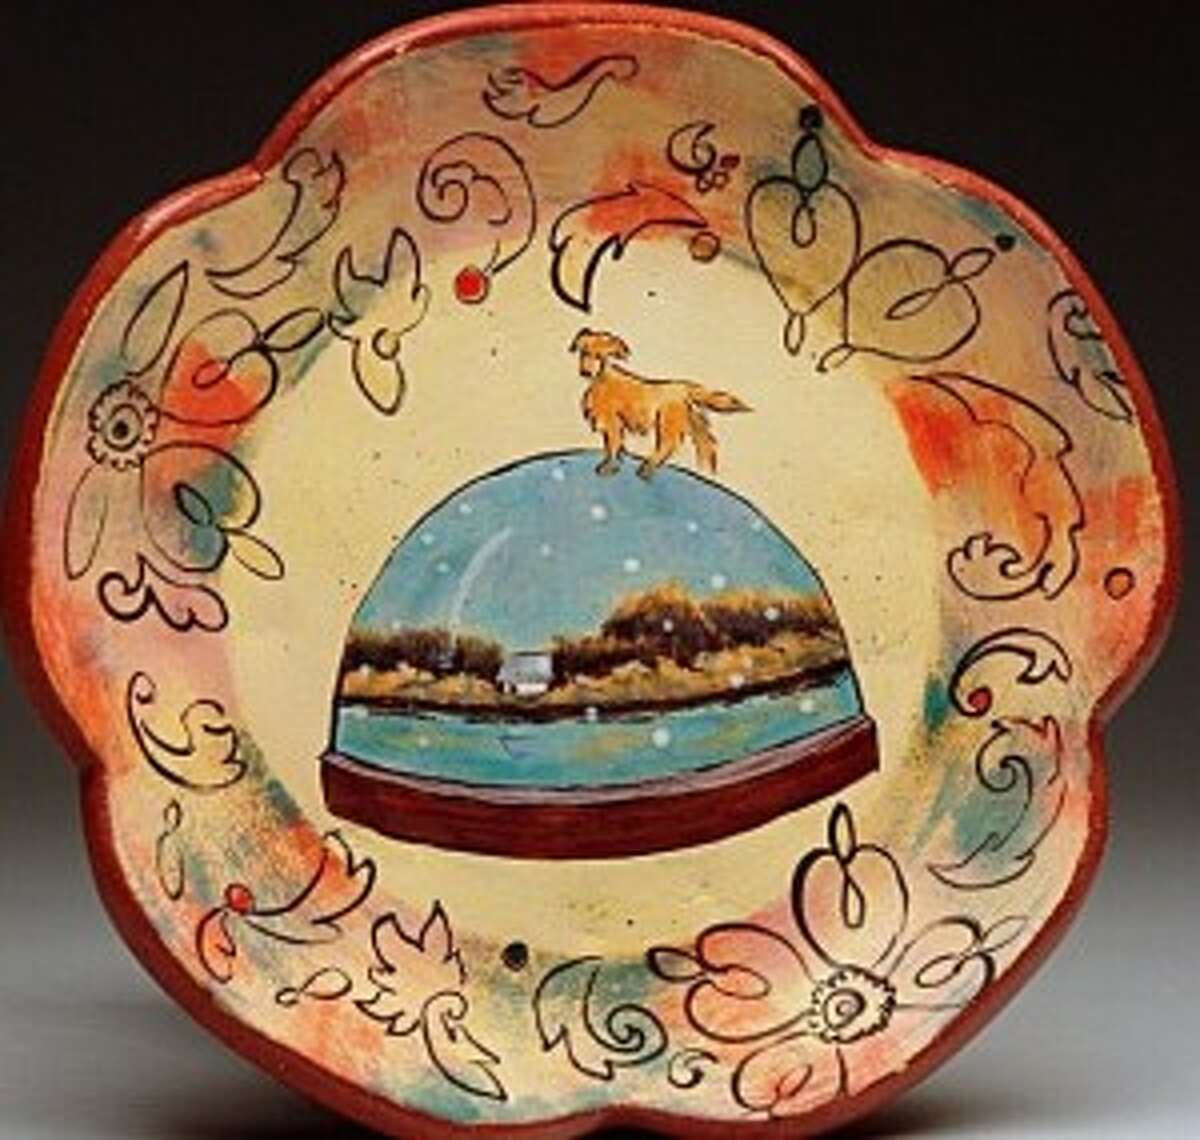 TRIO: Beth J. Tarkington, a ceramics artist from Marietta, Georgia, will be displaying her hand-painted ceramic art, along with local artists Ellie Harold and Elizabeth Rodgers Hill. (Courtesy Photo)